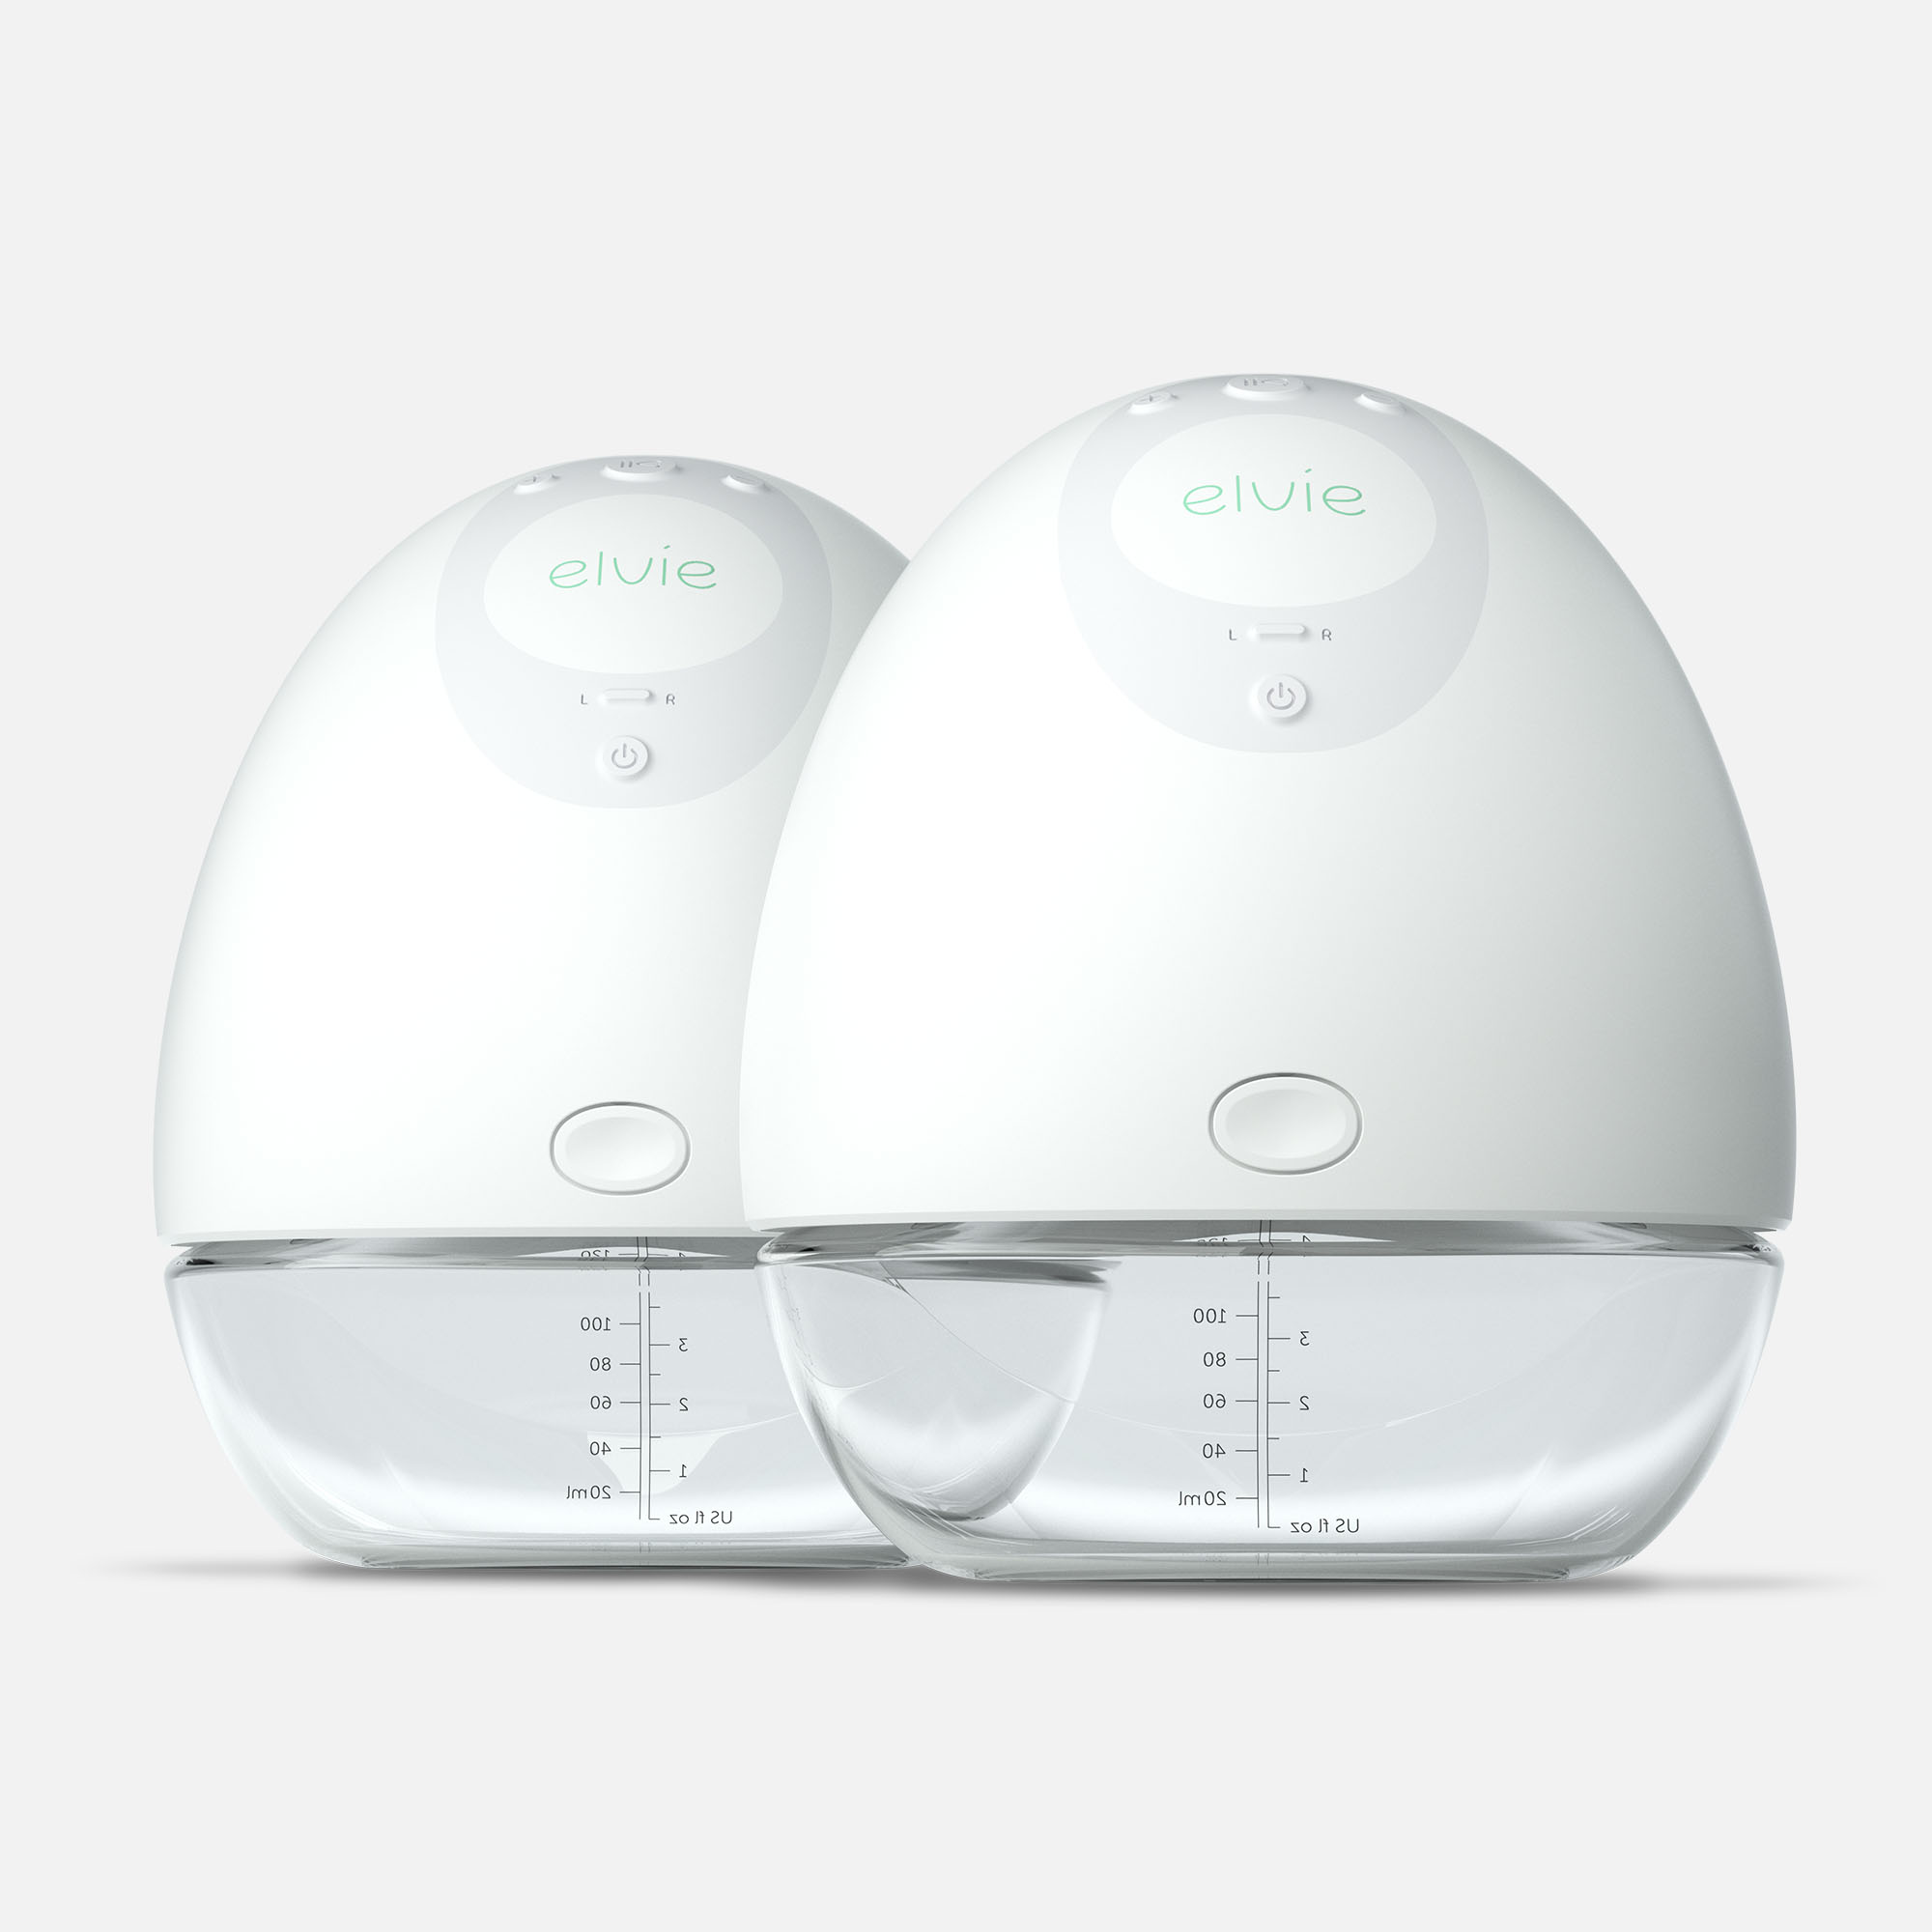 Elvie Breast Pump - Double, Wearable Breast Pump with App - The Smallest,  Quietest Electric Breast Pump - Portable Breast Pumps Hands Free & Discreet